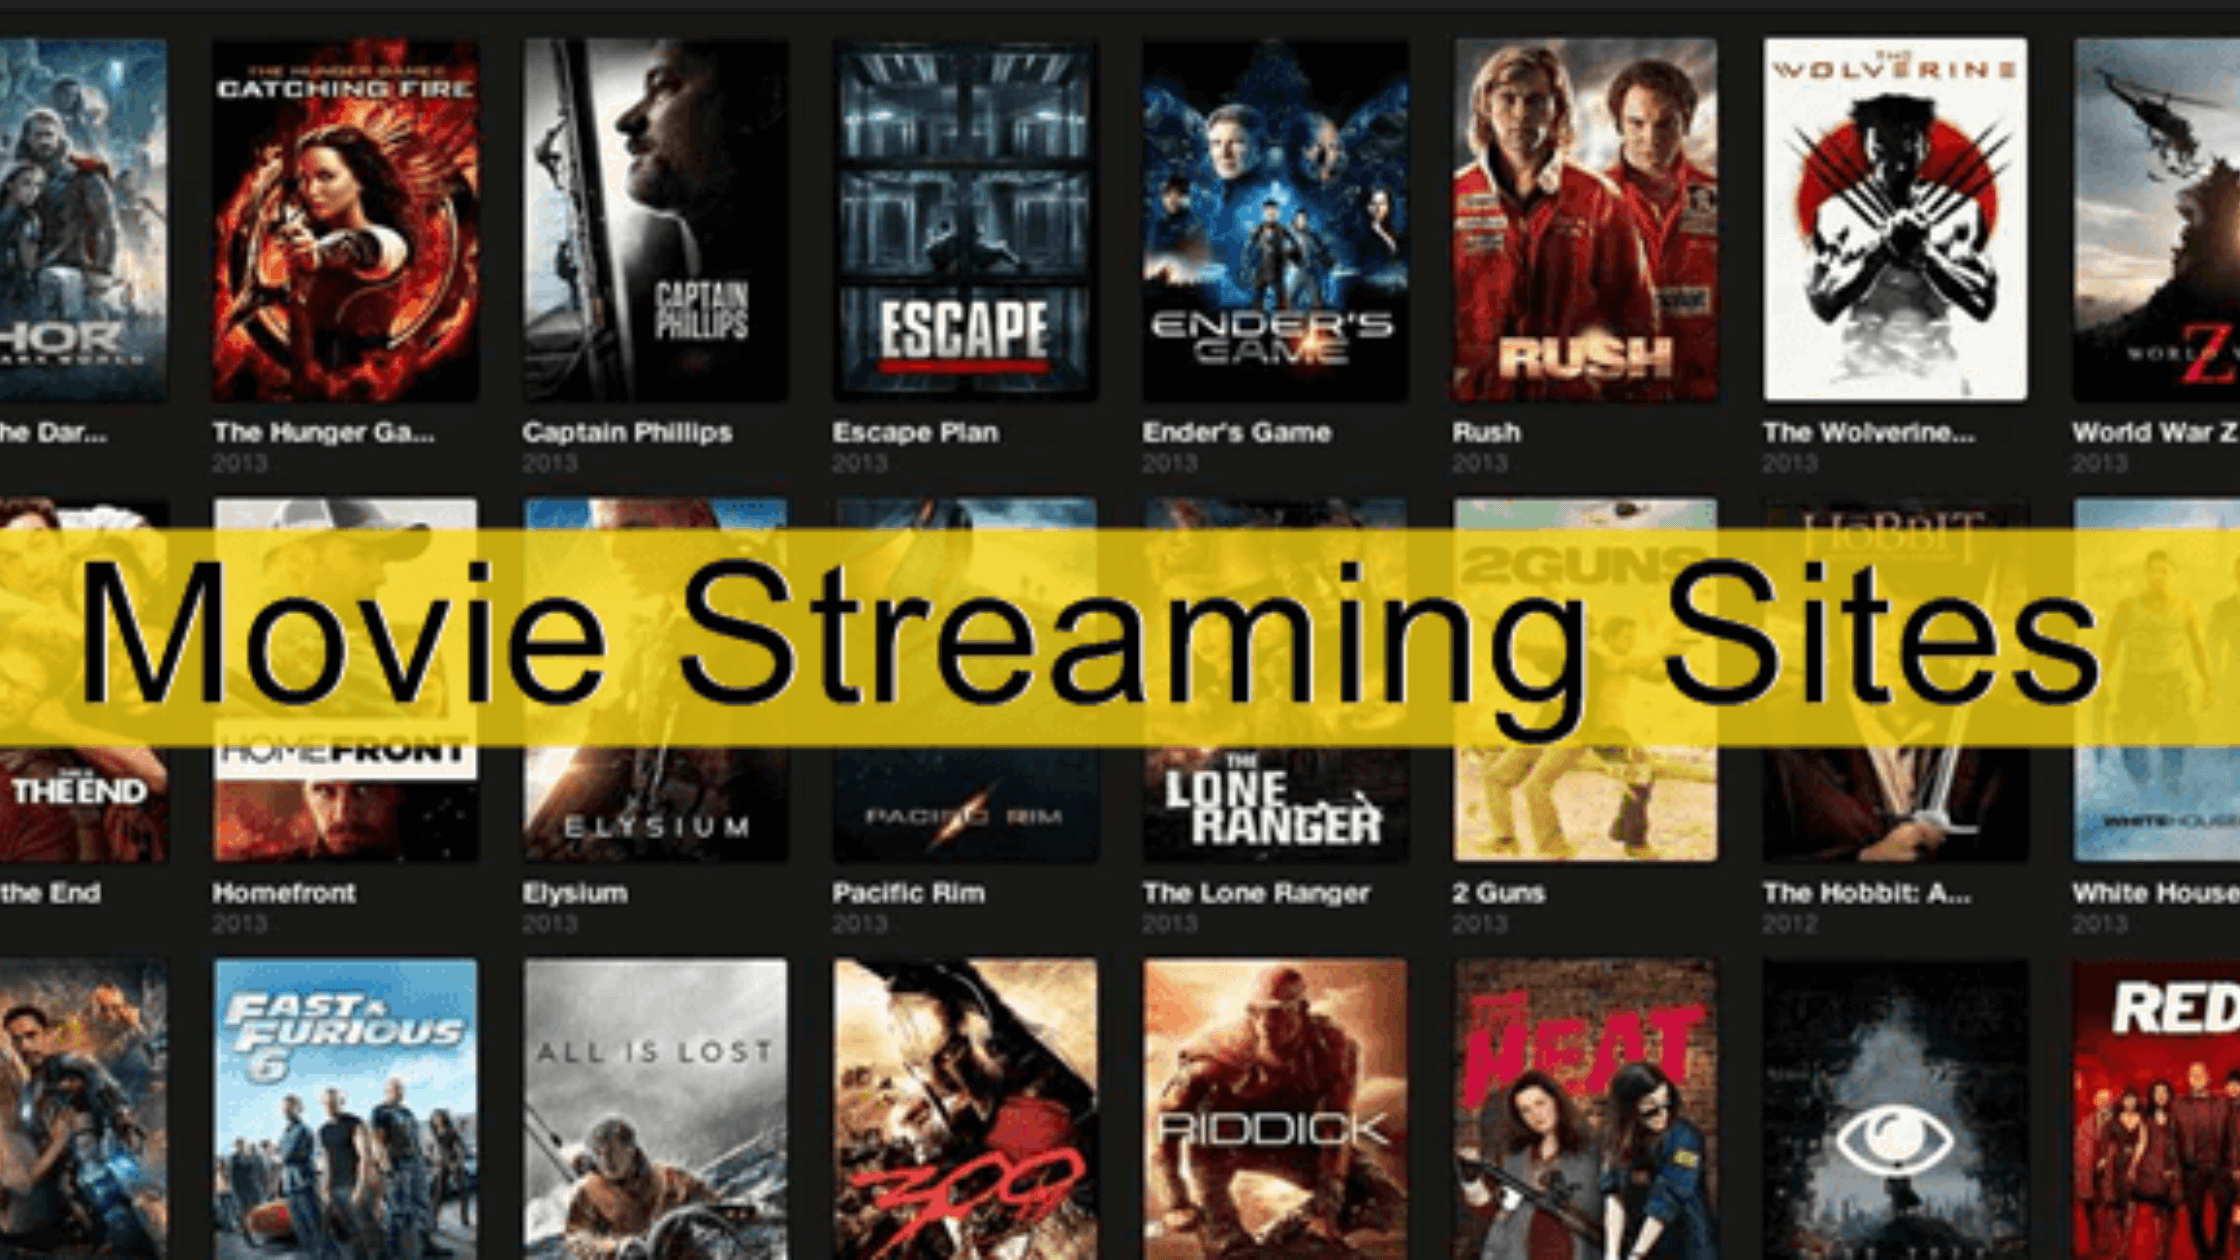 The Best Online Movie Streaming Genres to Match Your Moods and Occasions